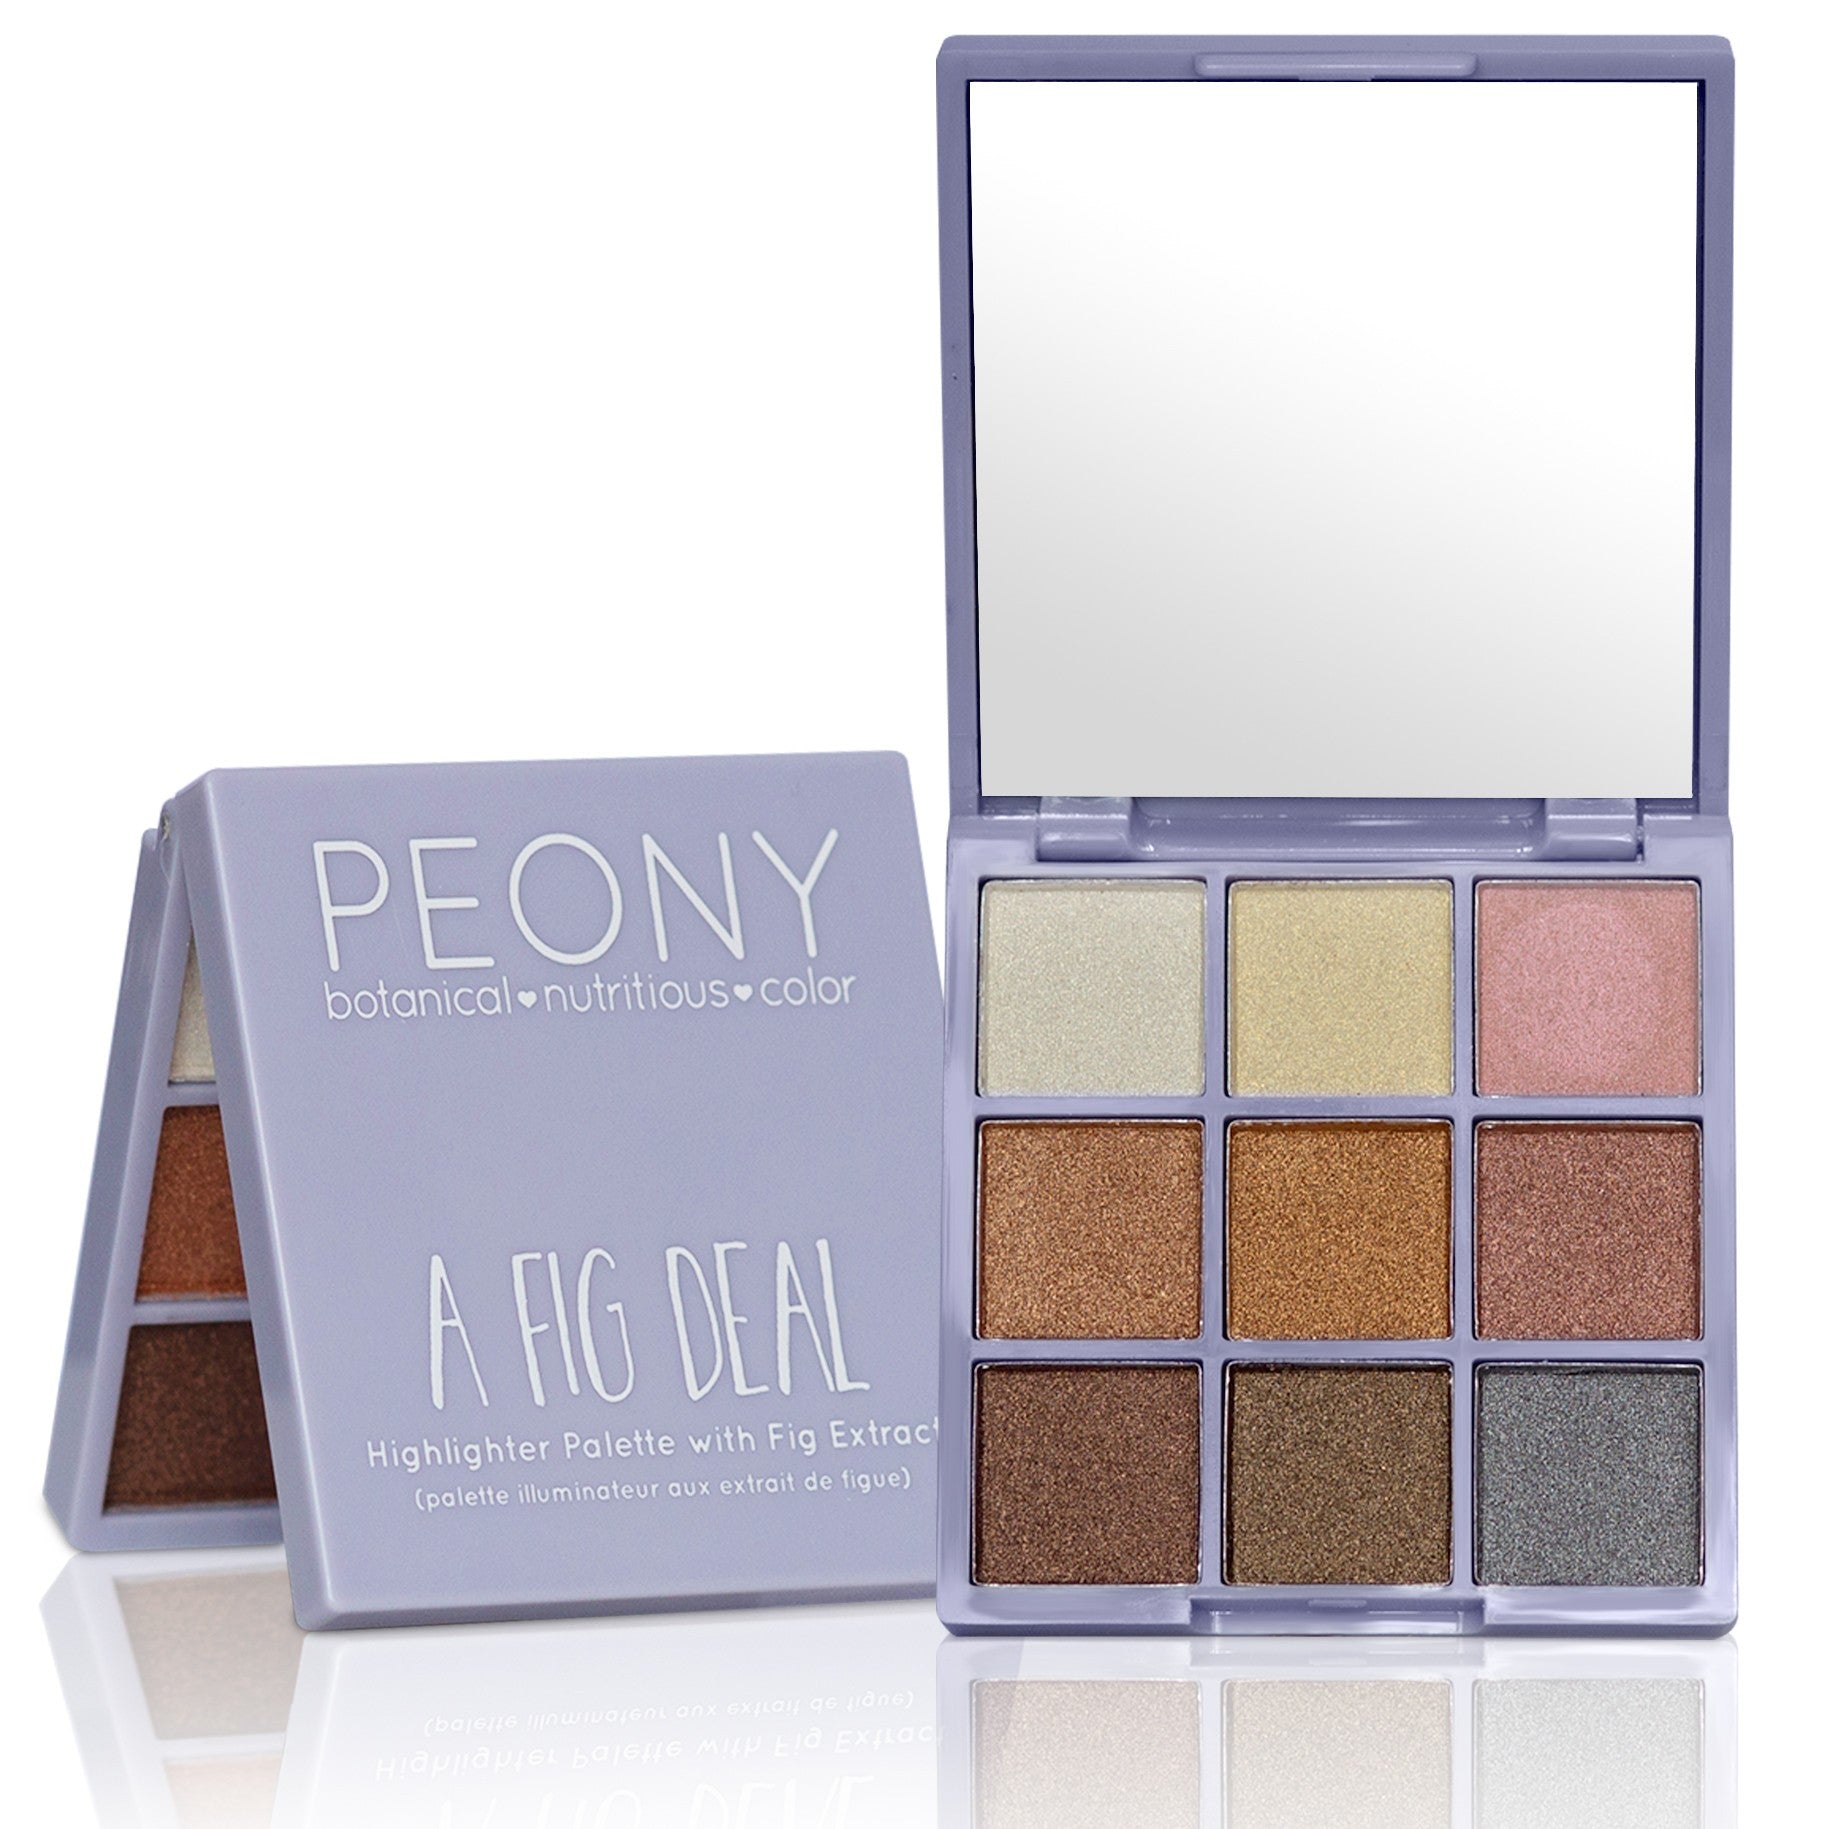 A Fig Deal - Highlighter & Eyeshadow Palette with Fig Extract